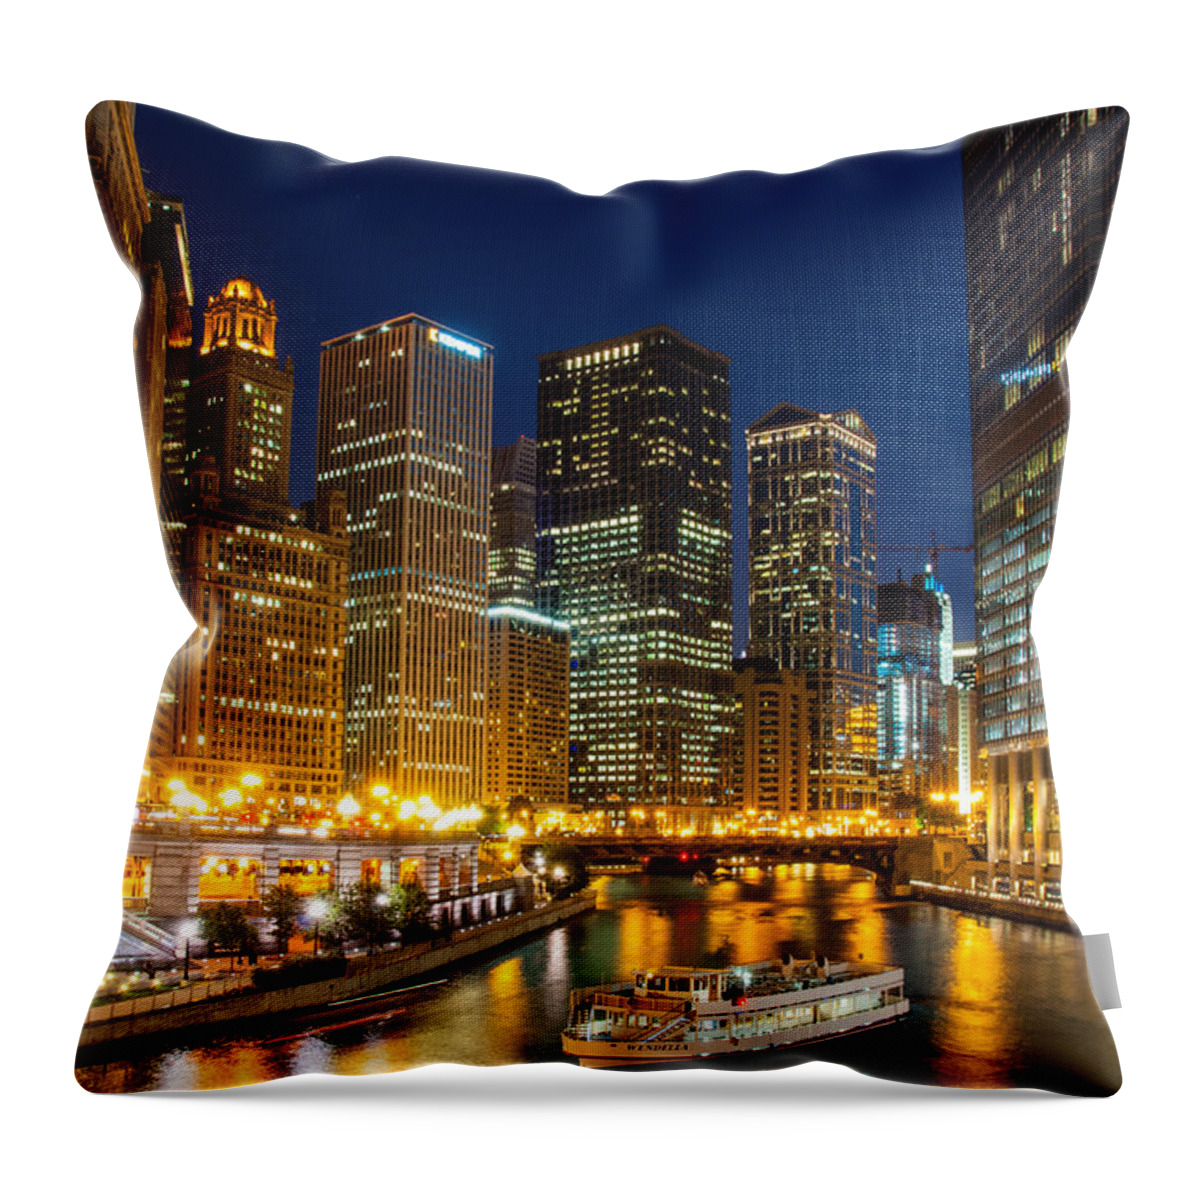 Chicago Throw Pillow featuring the photograph Chicago Magnificent Mile by Lev Kaytsner